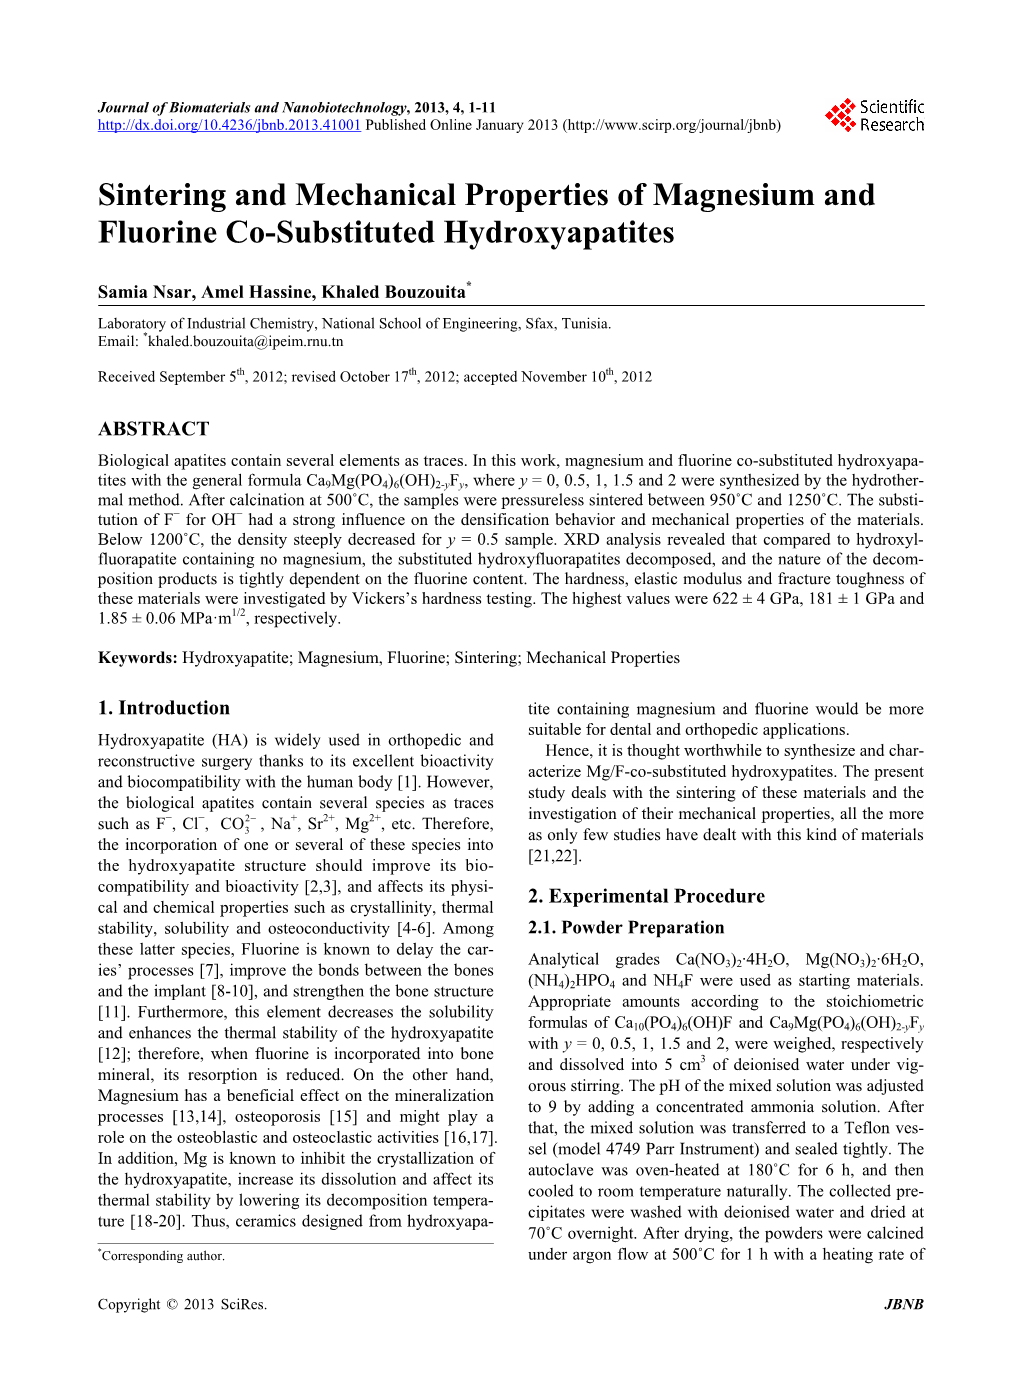 Sintering and Mechanical Properties of Magnesium and Fluorine Co-Substituted Hydroxyapatites